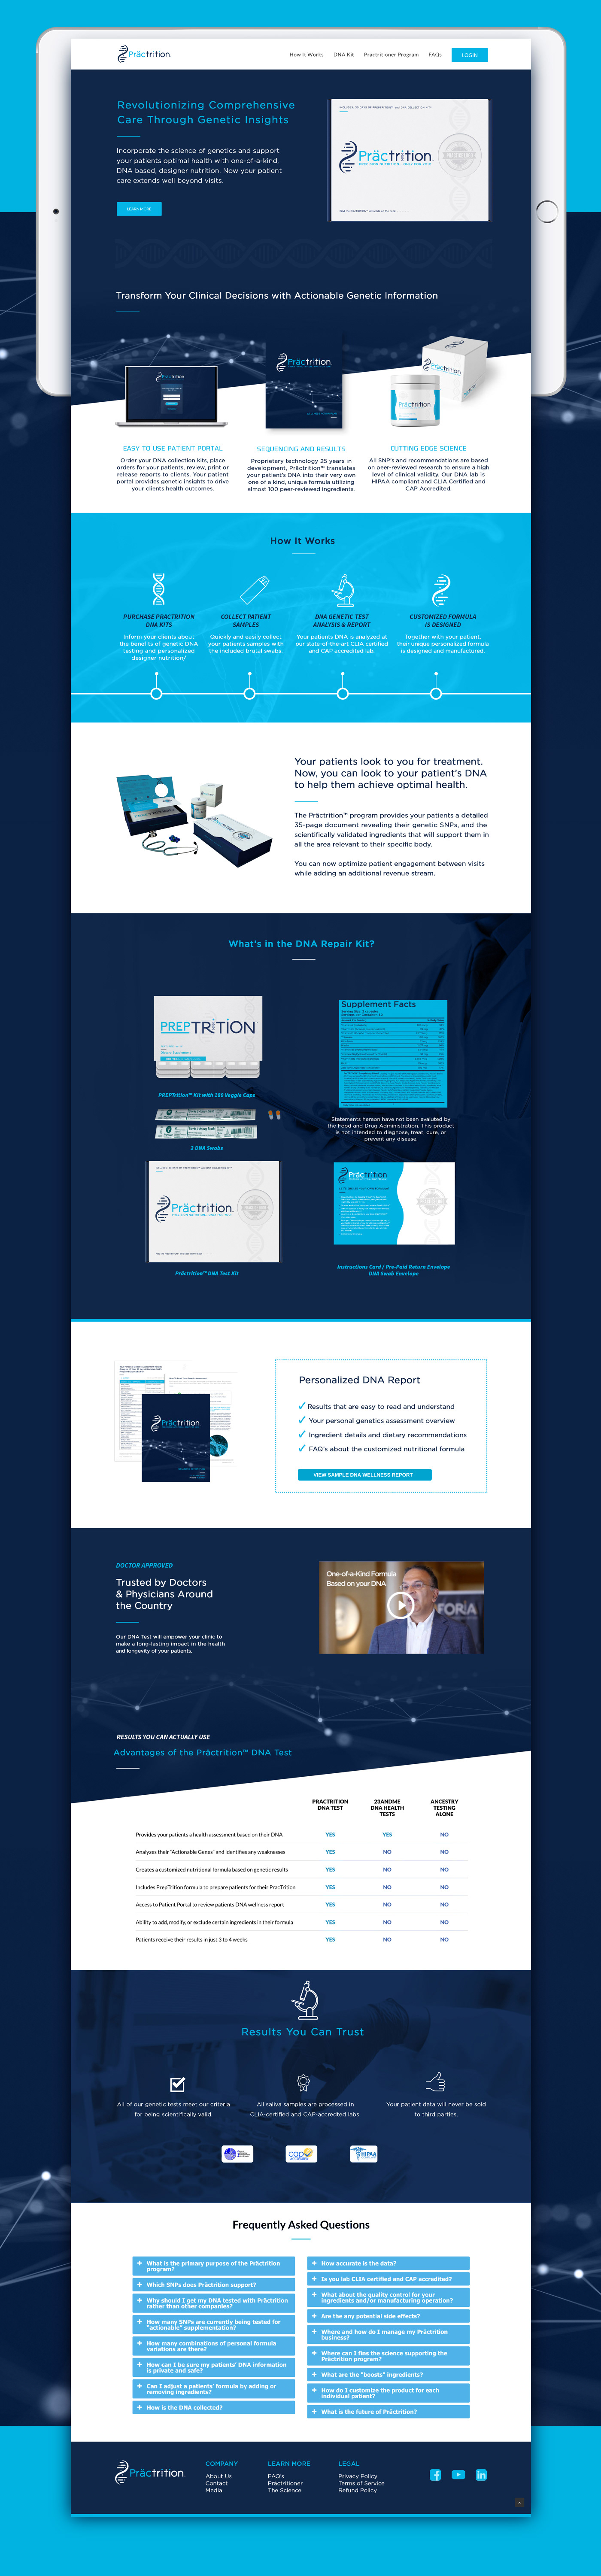 dna testing kit box Editorial Layouts icons and DNA Helix inspire logo branding medical health doctors nutritional supplements pantone colors supplemental packaging Webpage designs